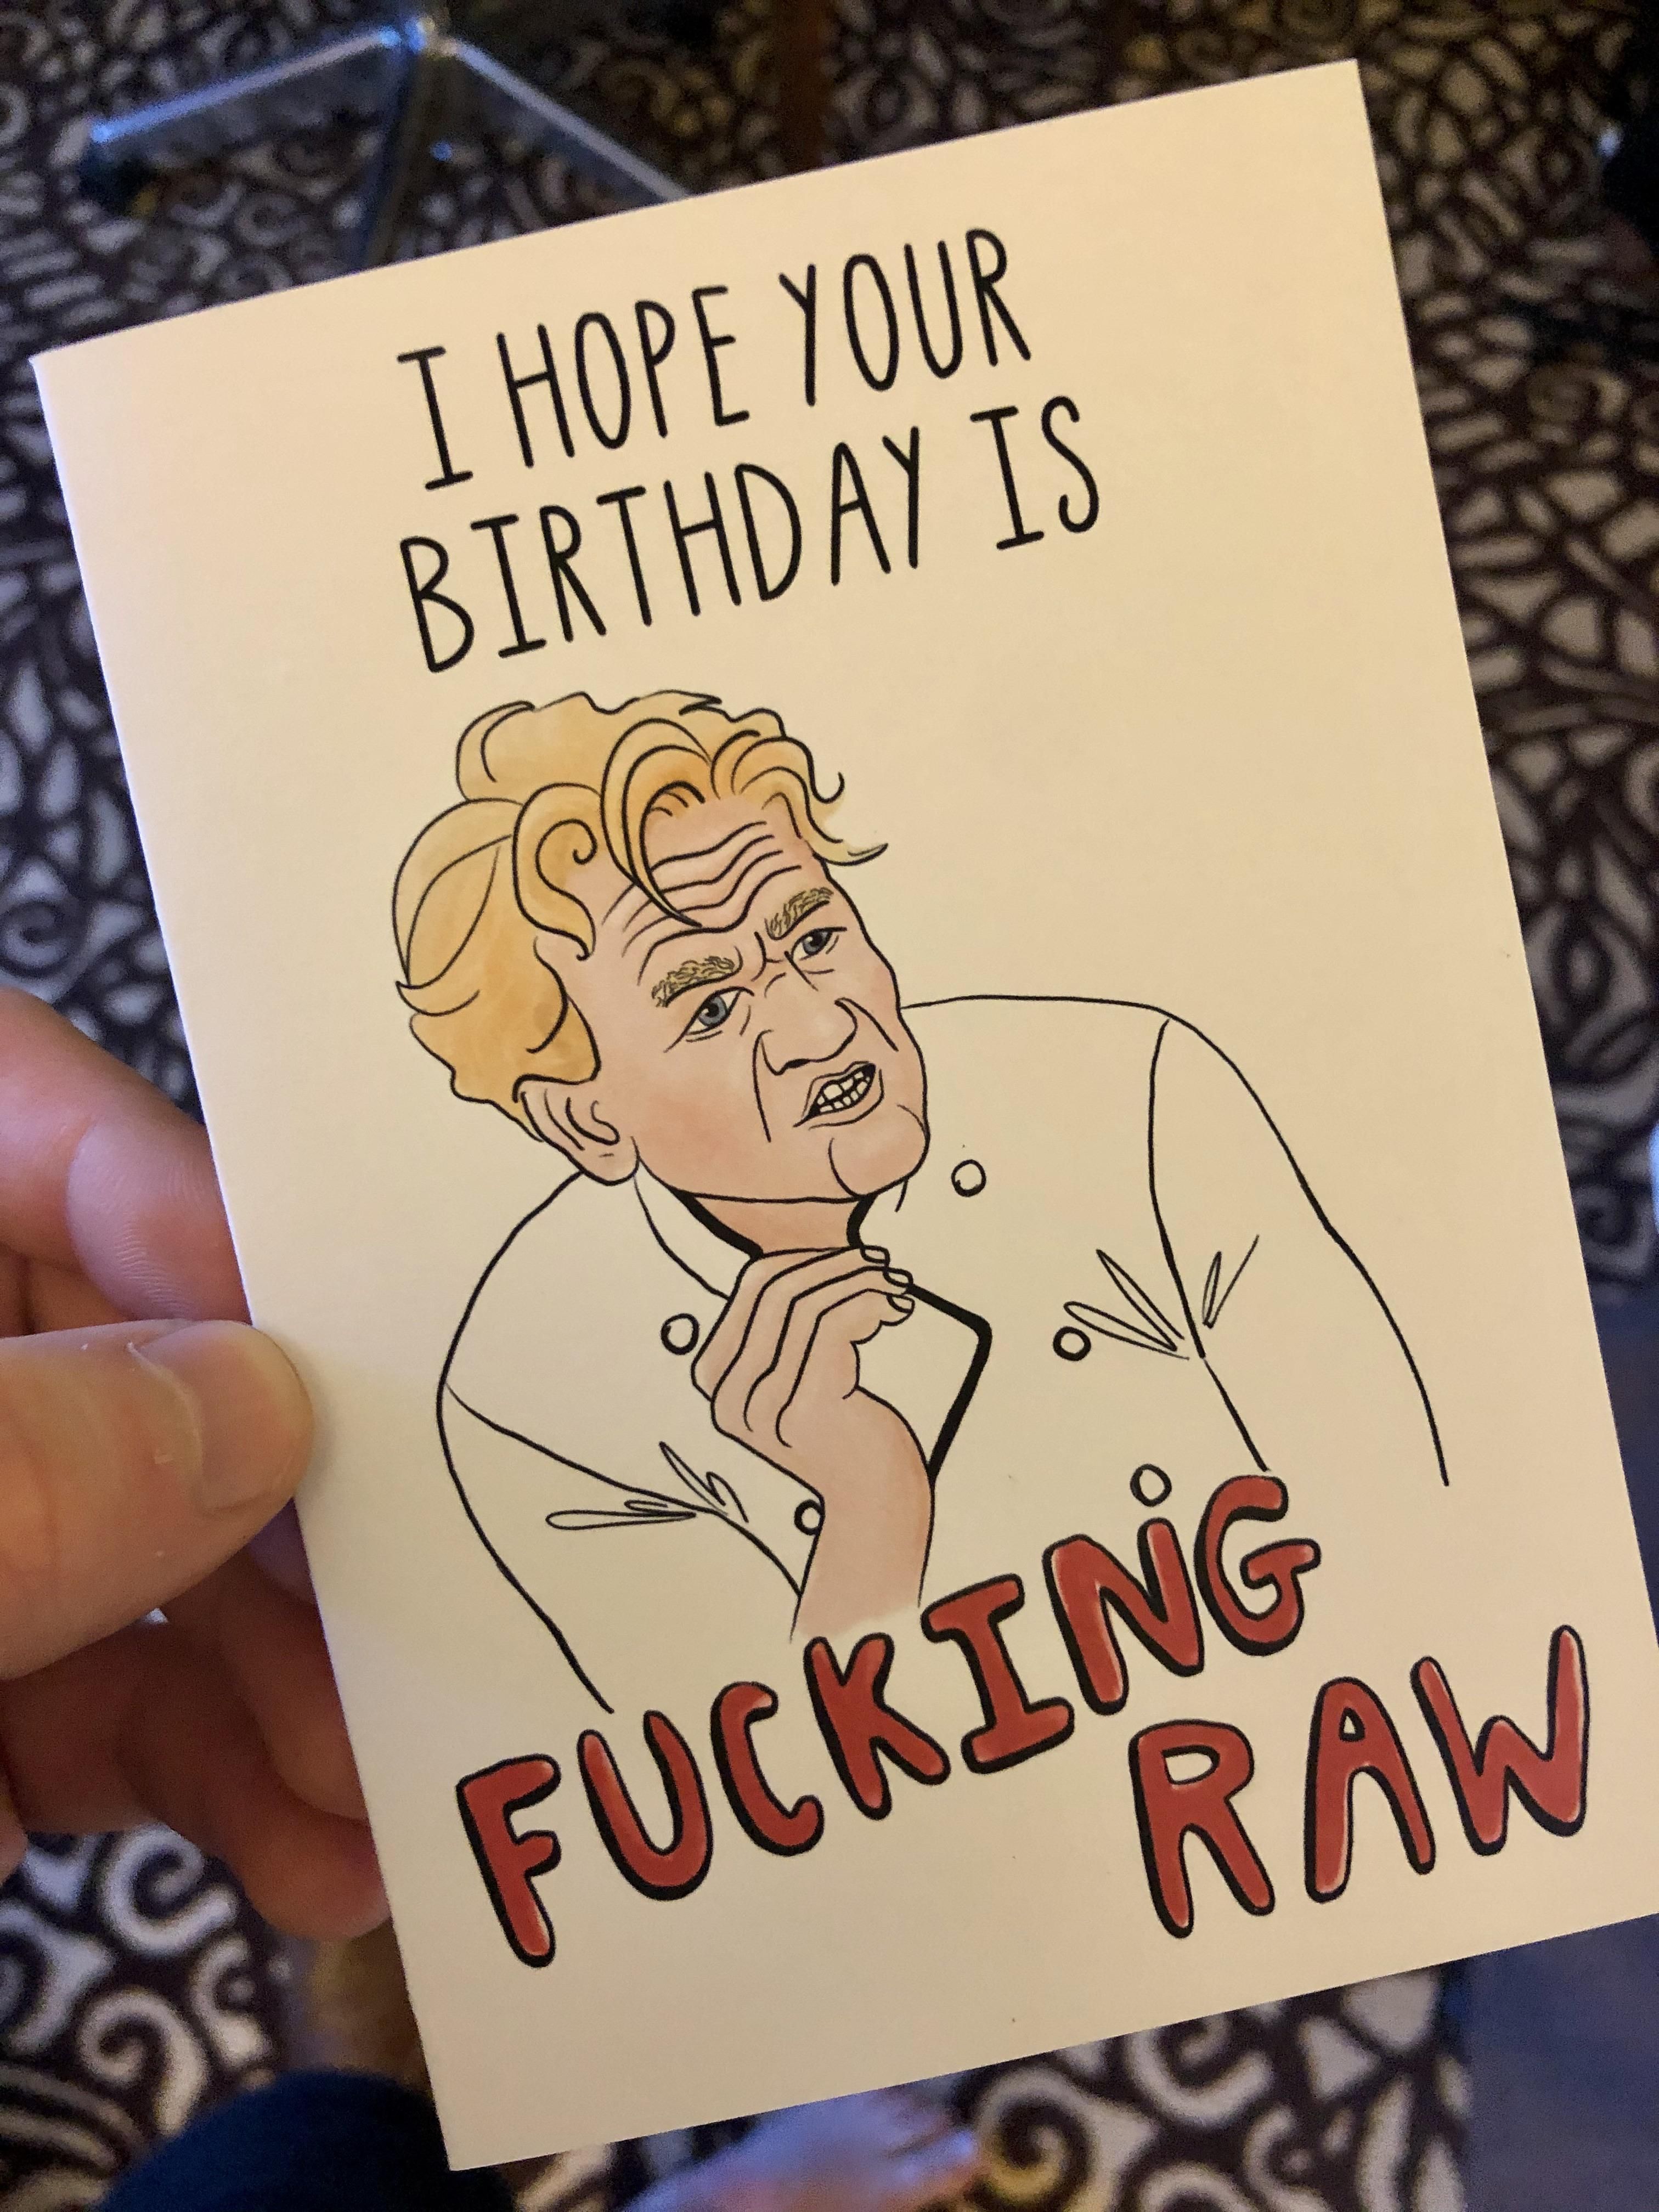 Been watching a lot of Hell’s Kitchen lately so my girlfriend got my this card for my bday. Needless to say she killed it!